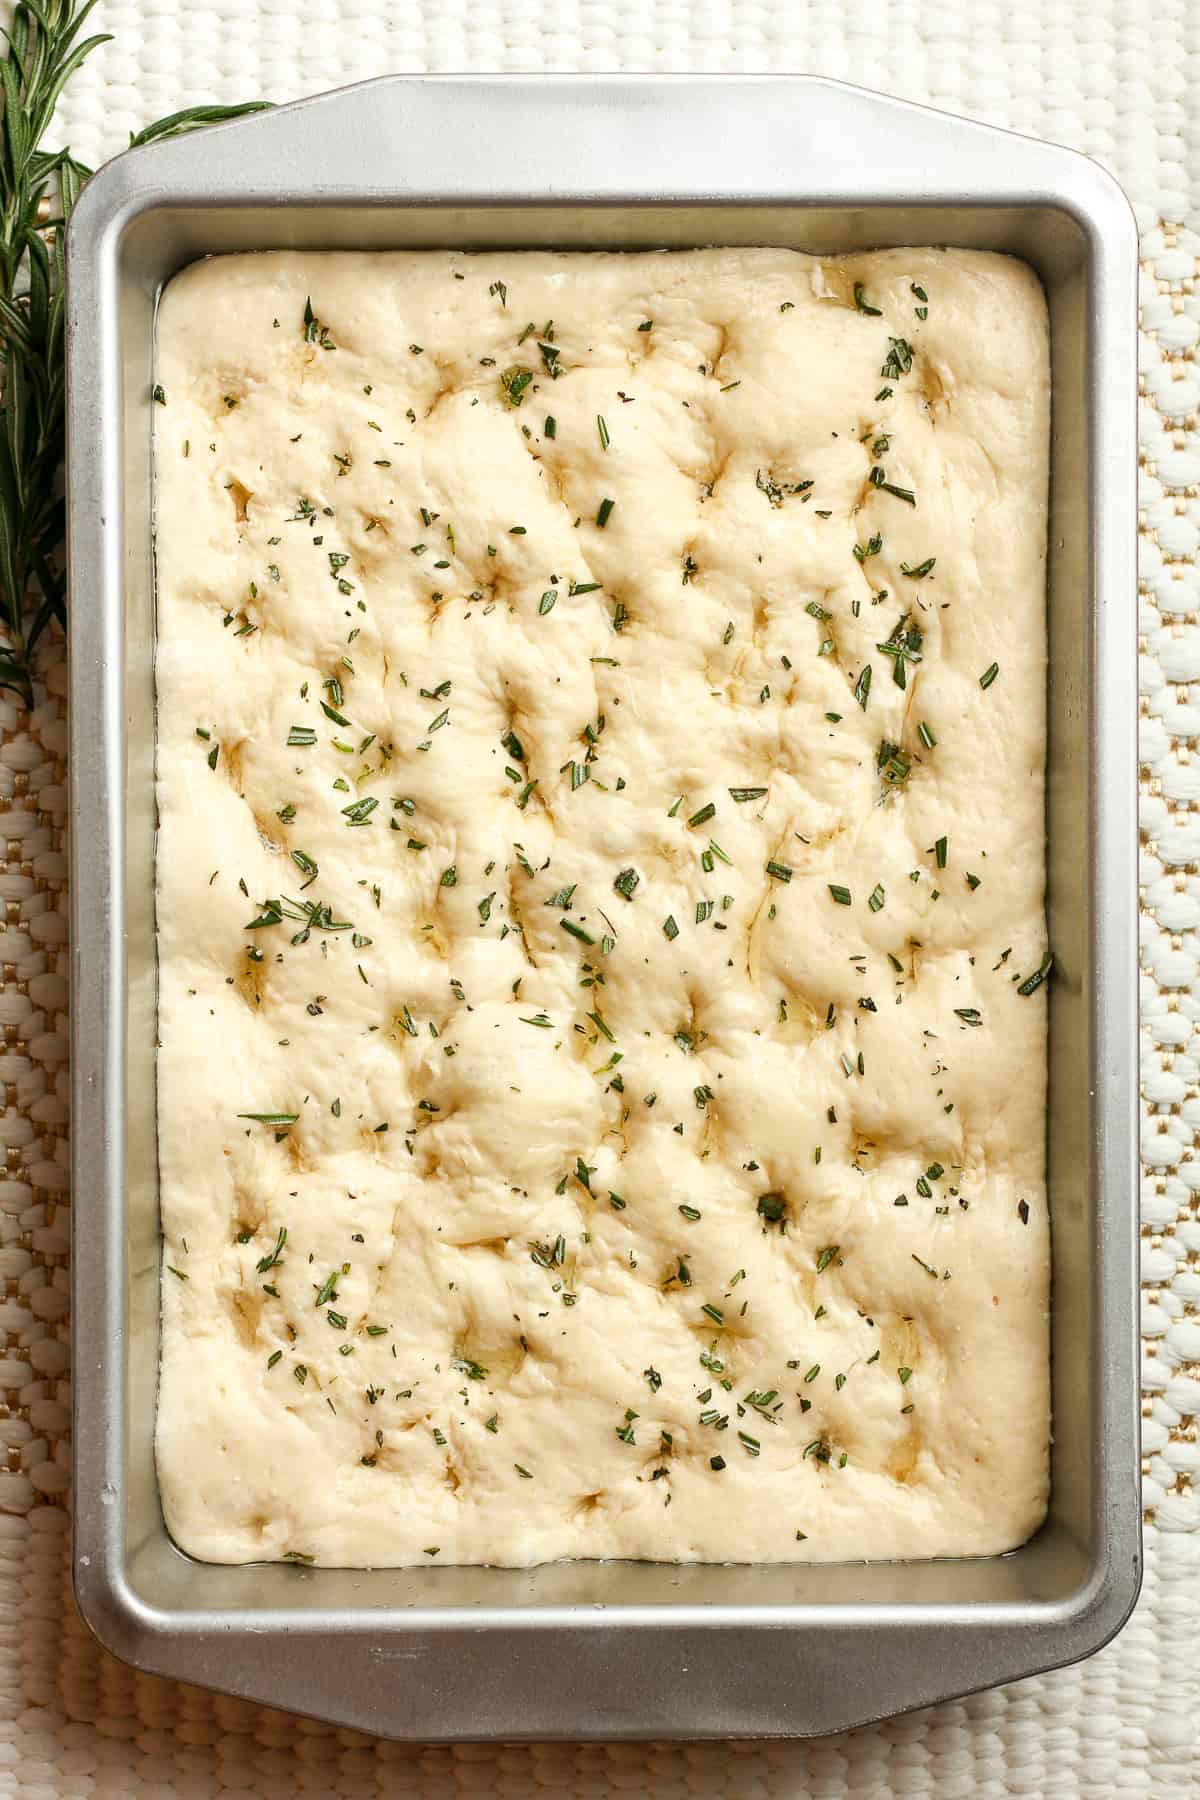 The focaccia dough with rosemary on top, ready to bake.